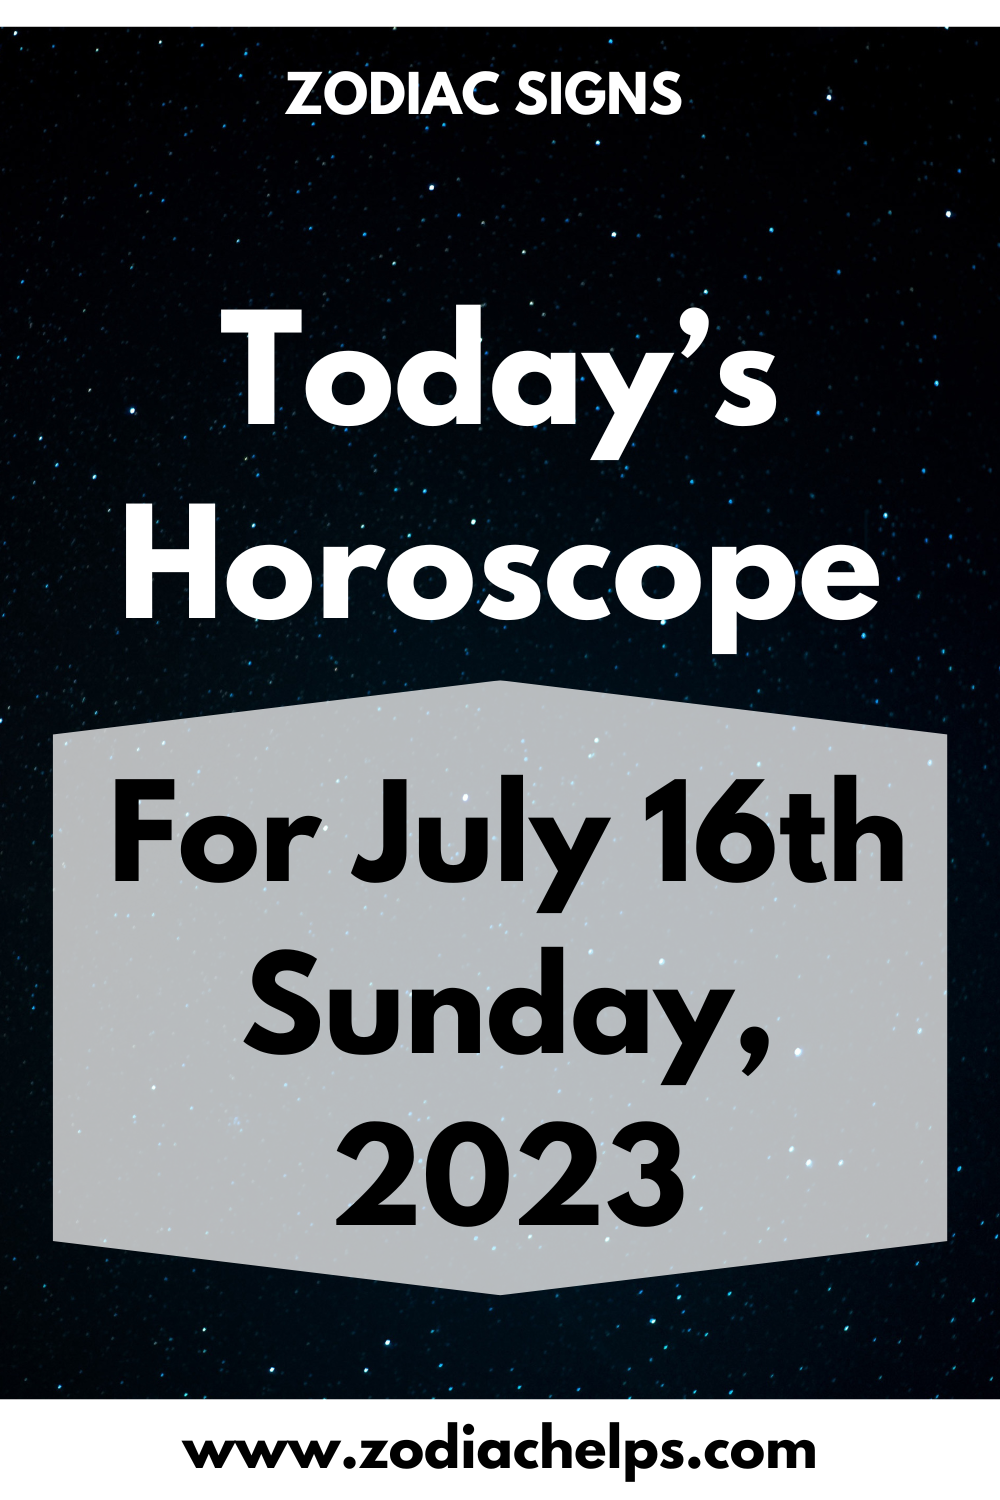 Today’s Horoscope for July 16th Sunday, 2023